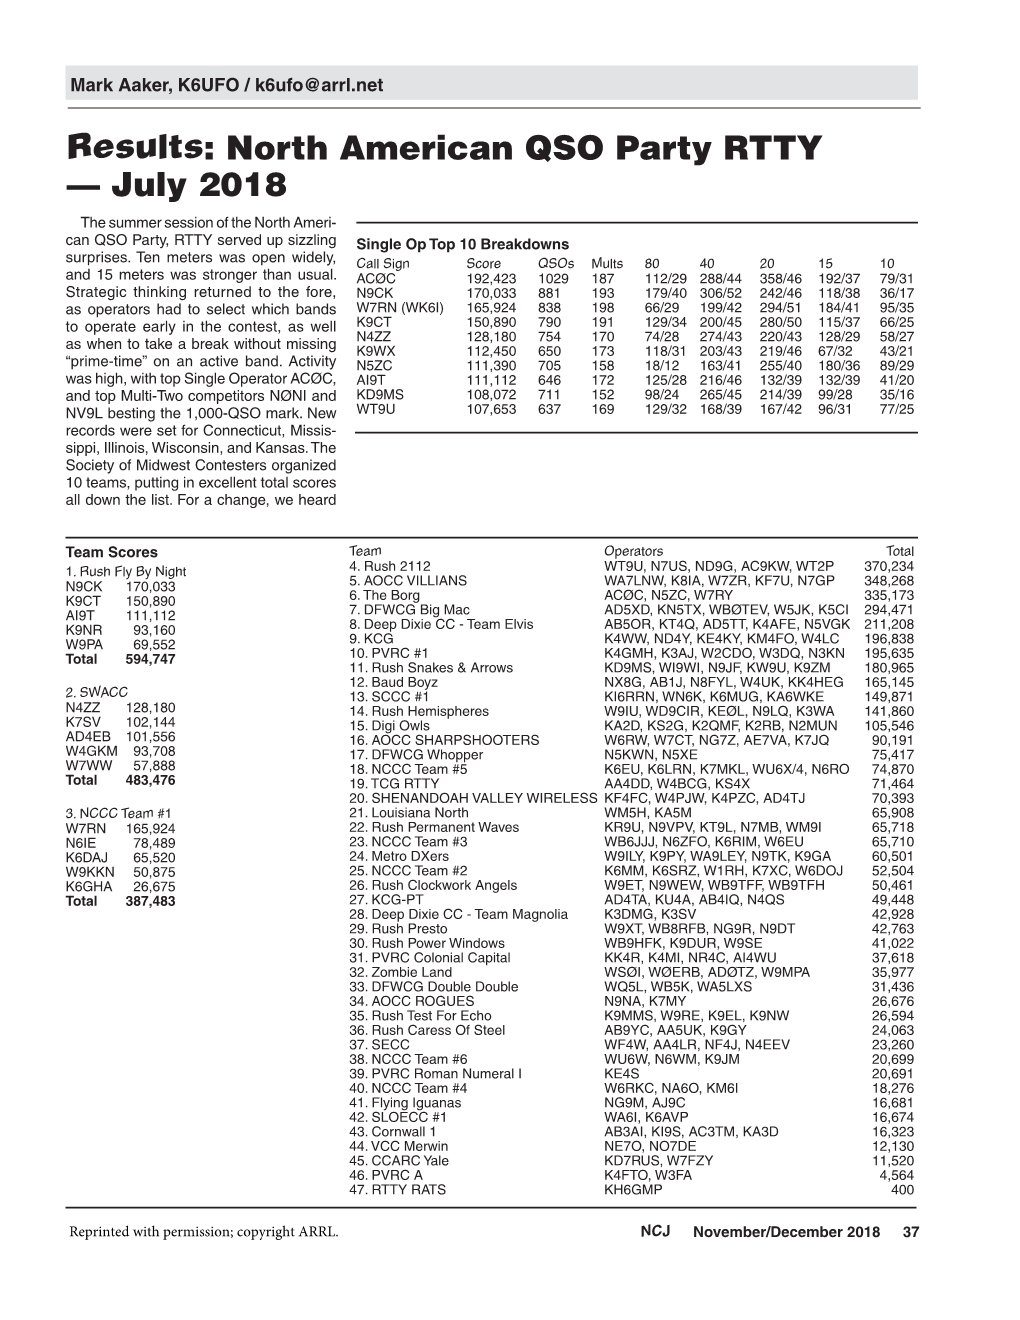 Results: North American QSO Party RTTY — July 2018 the Summer Session of the North Ameri- Can QSO Party, RTTY Served up Sizzling Single Op Top 10 Breakdowns Surprises